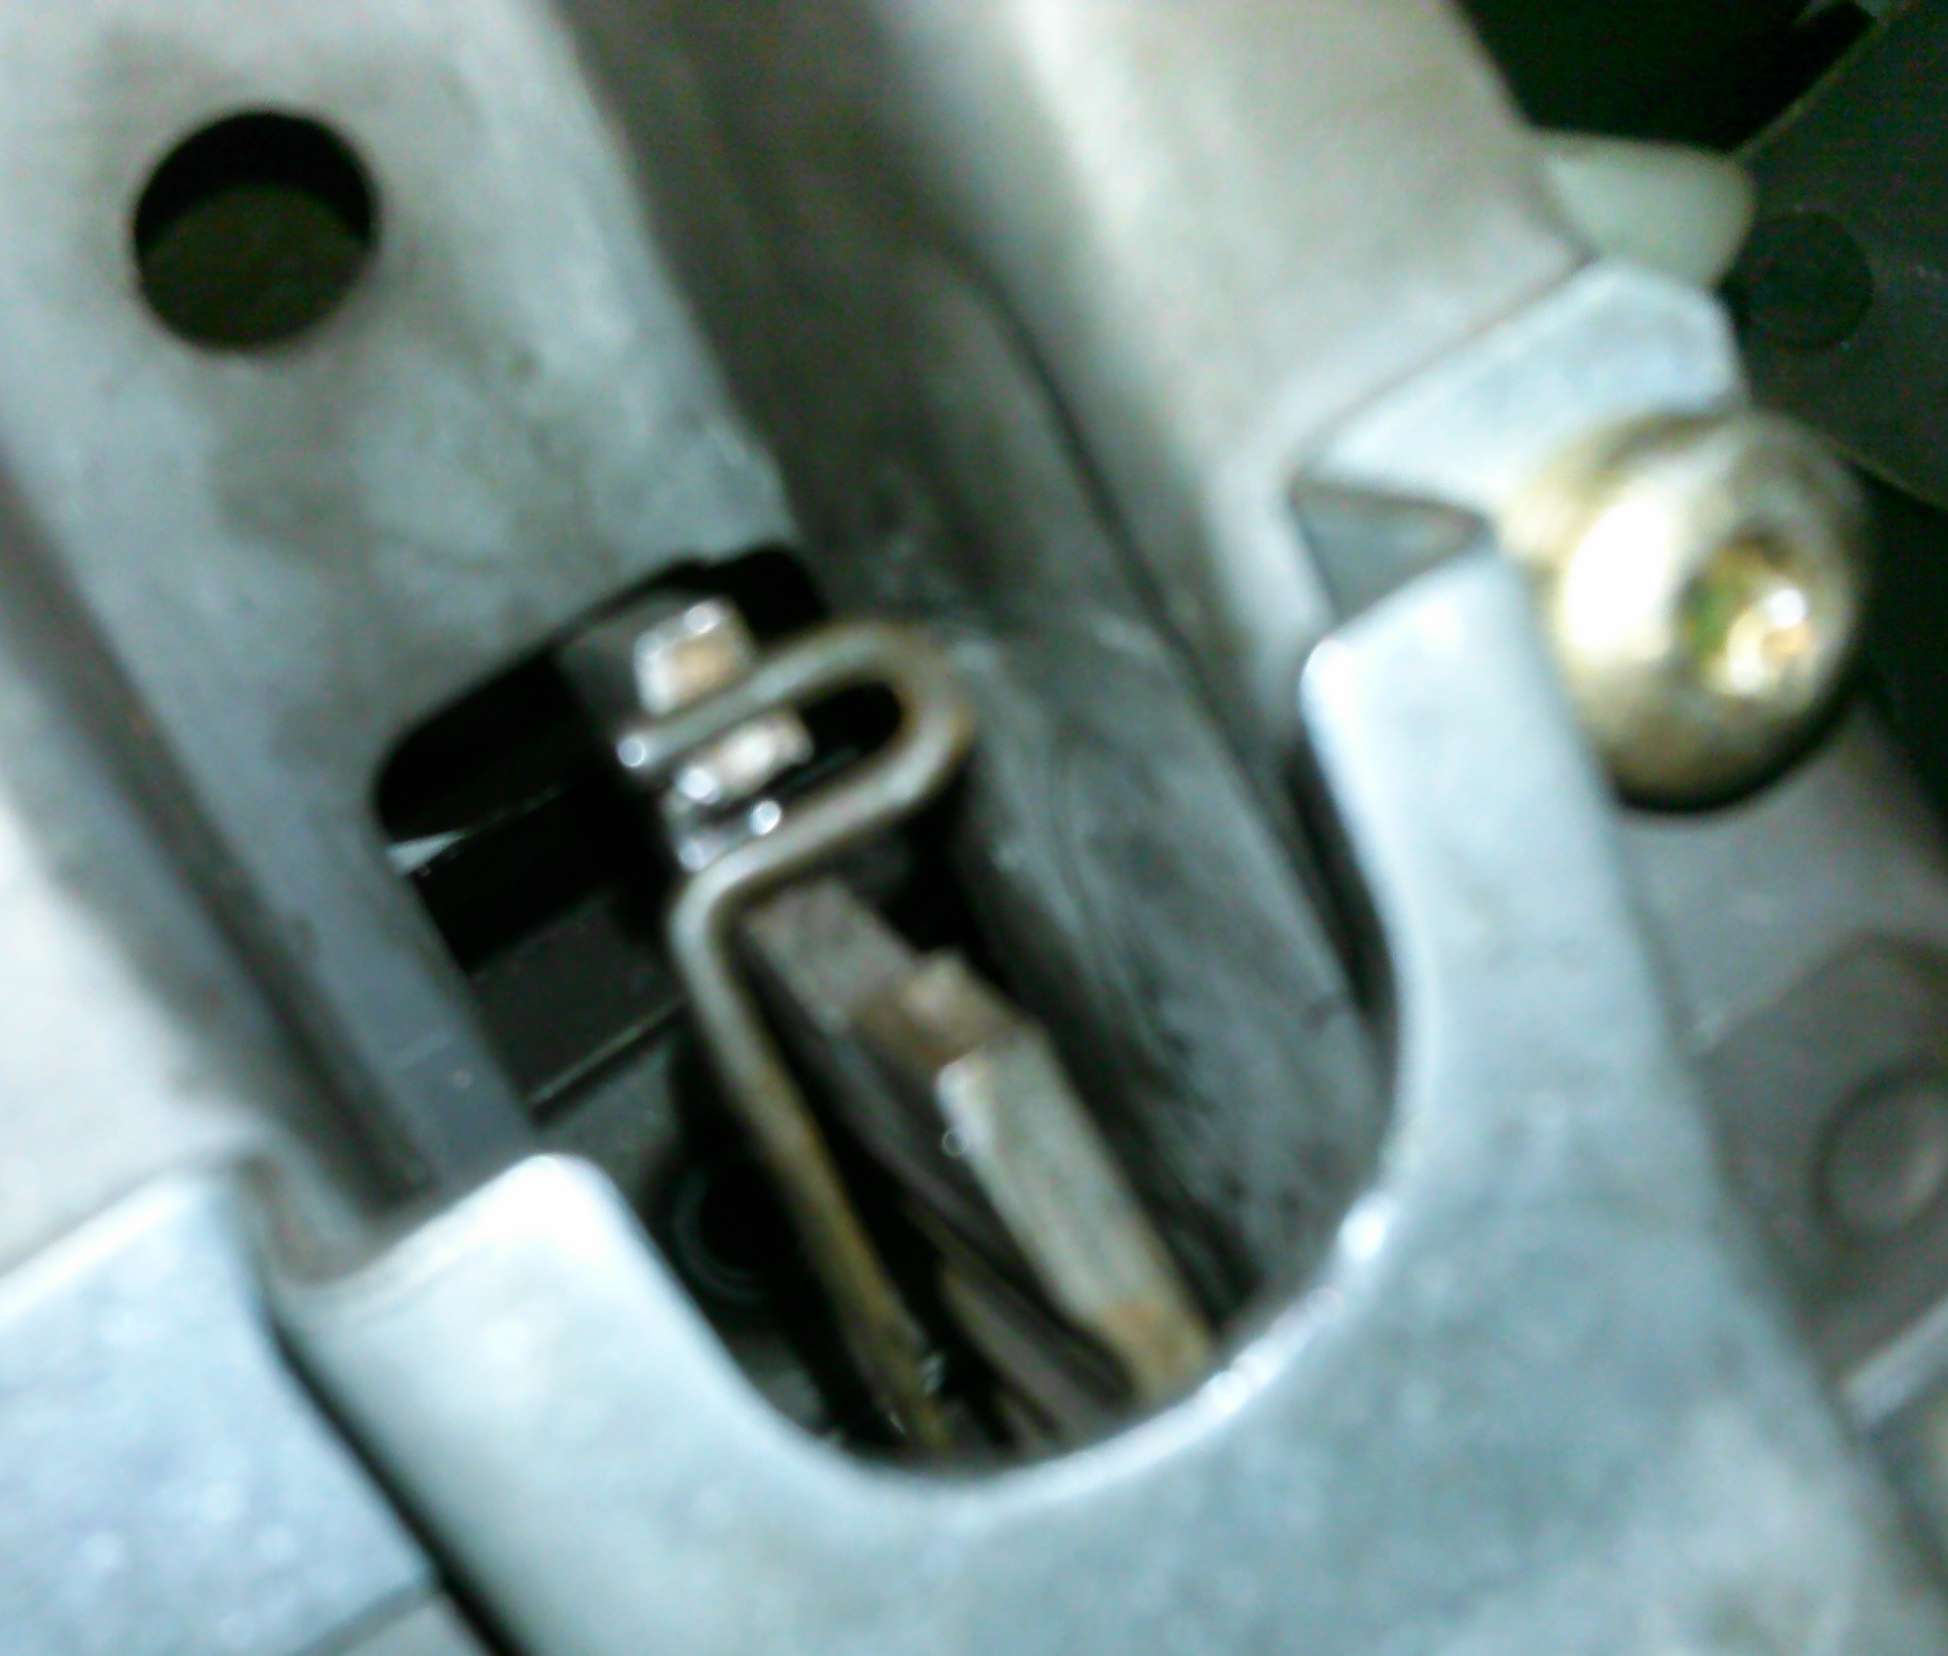 A picture of the clutch pedal hook and clip